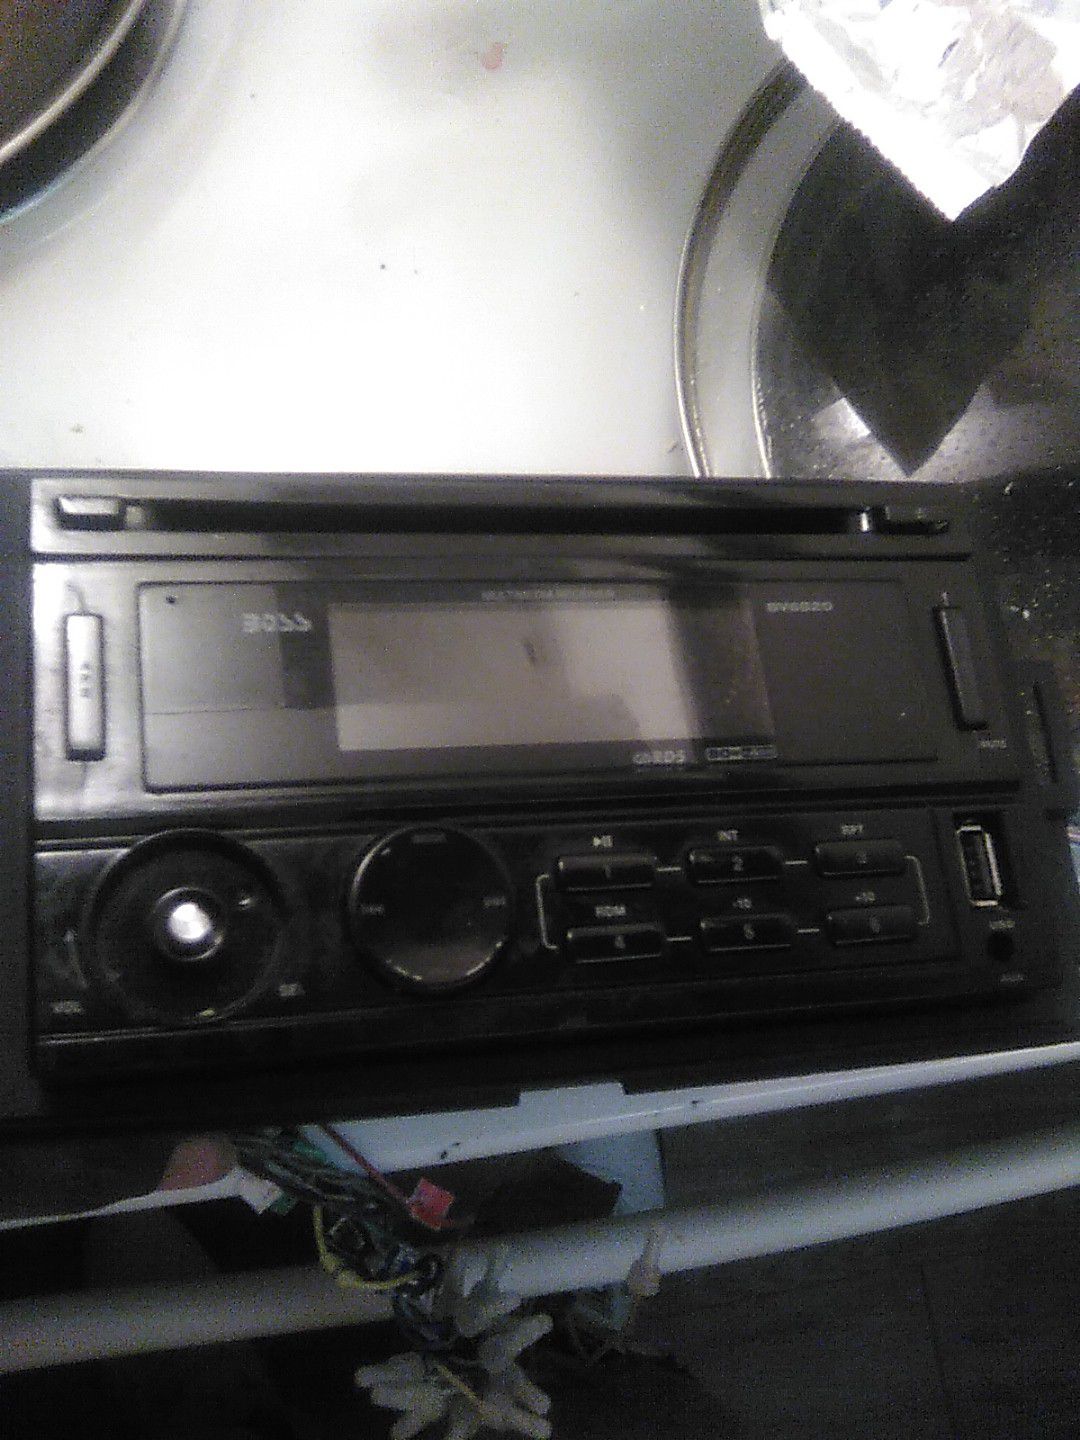 Boss CD player just missing the volume button but still works